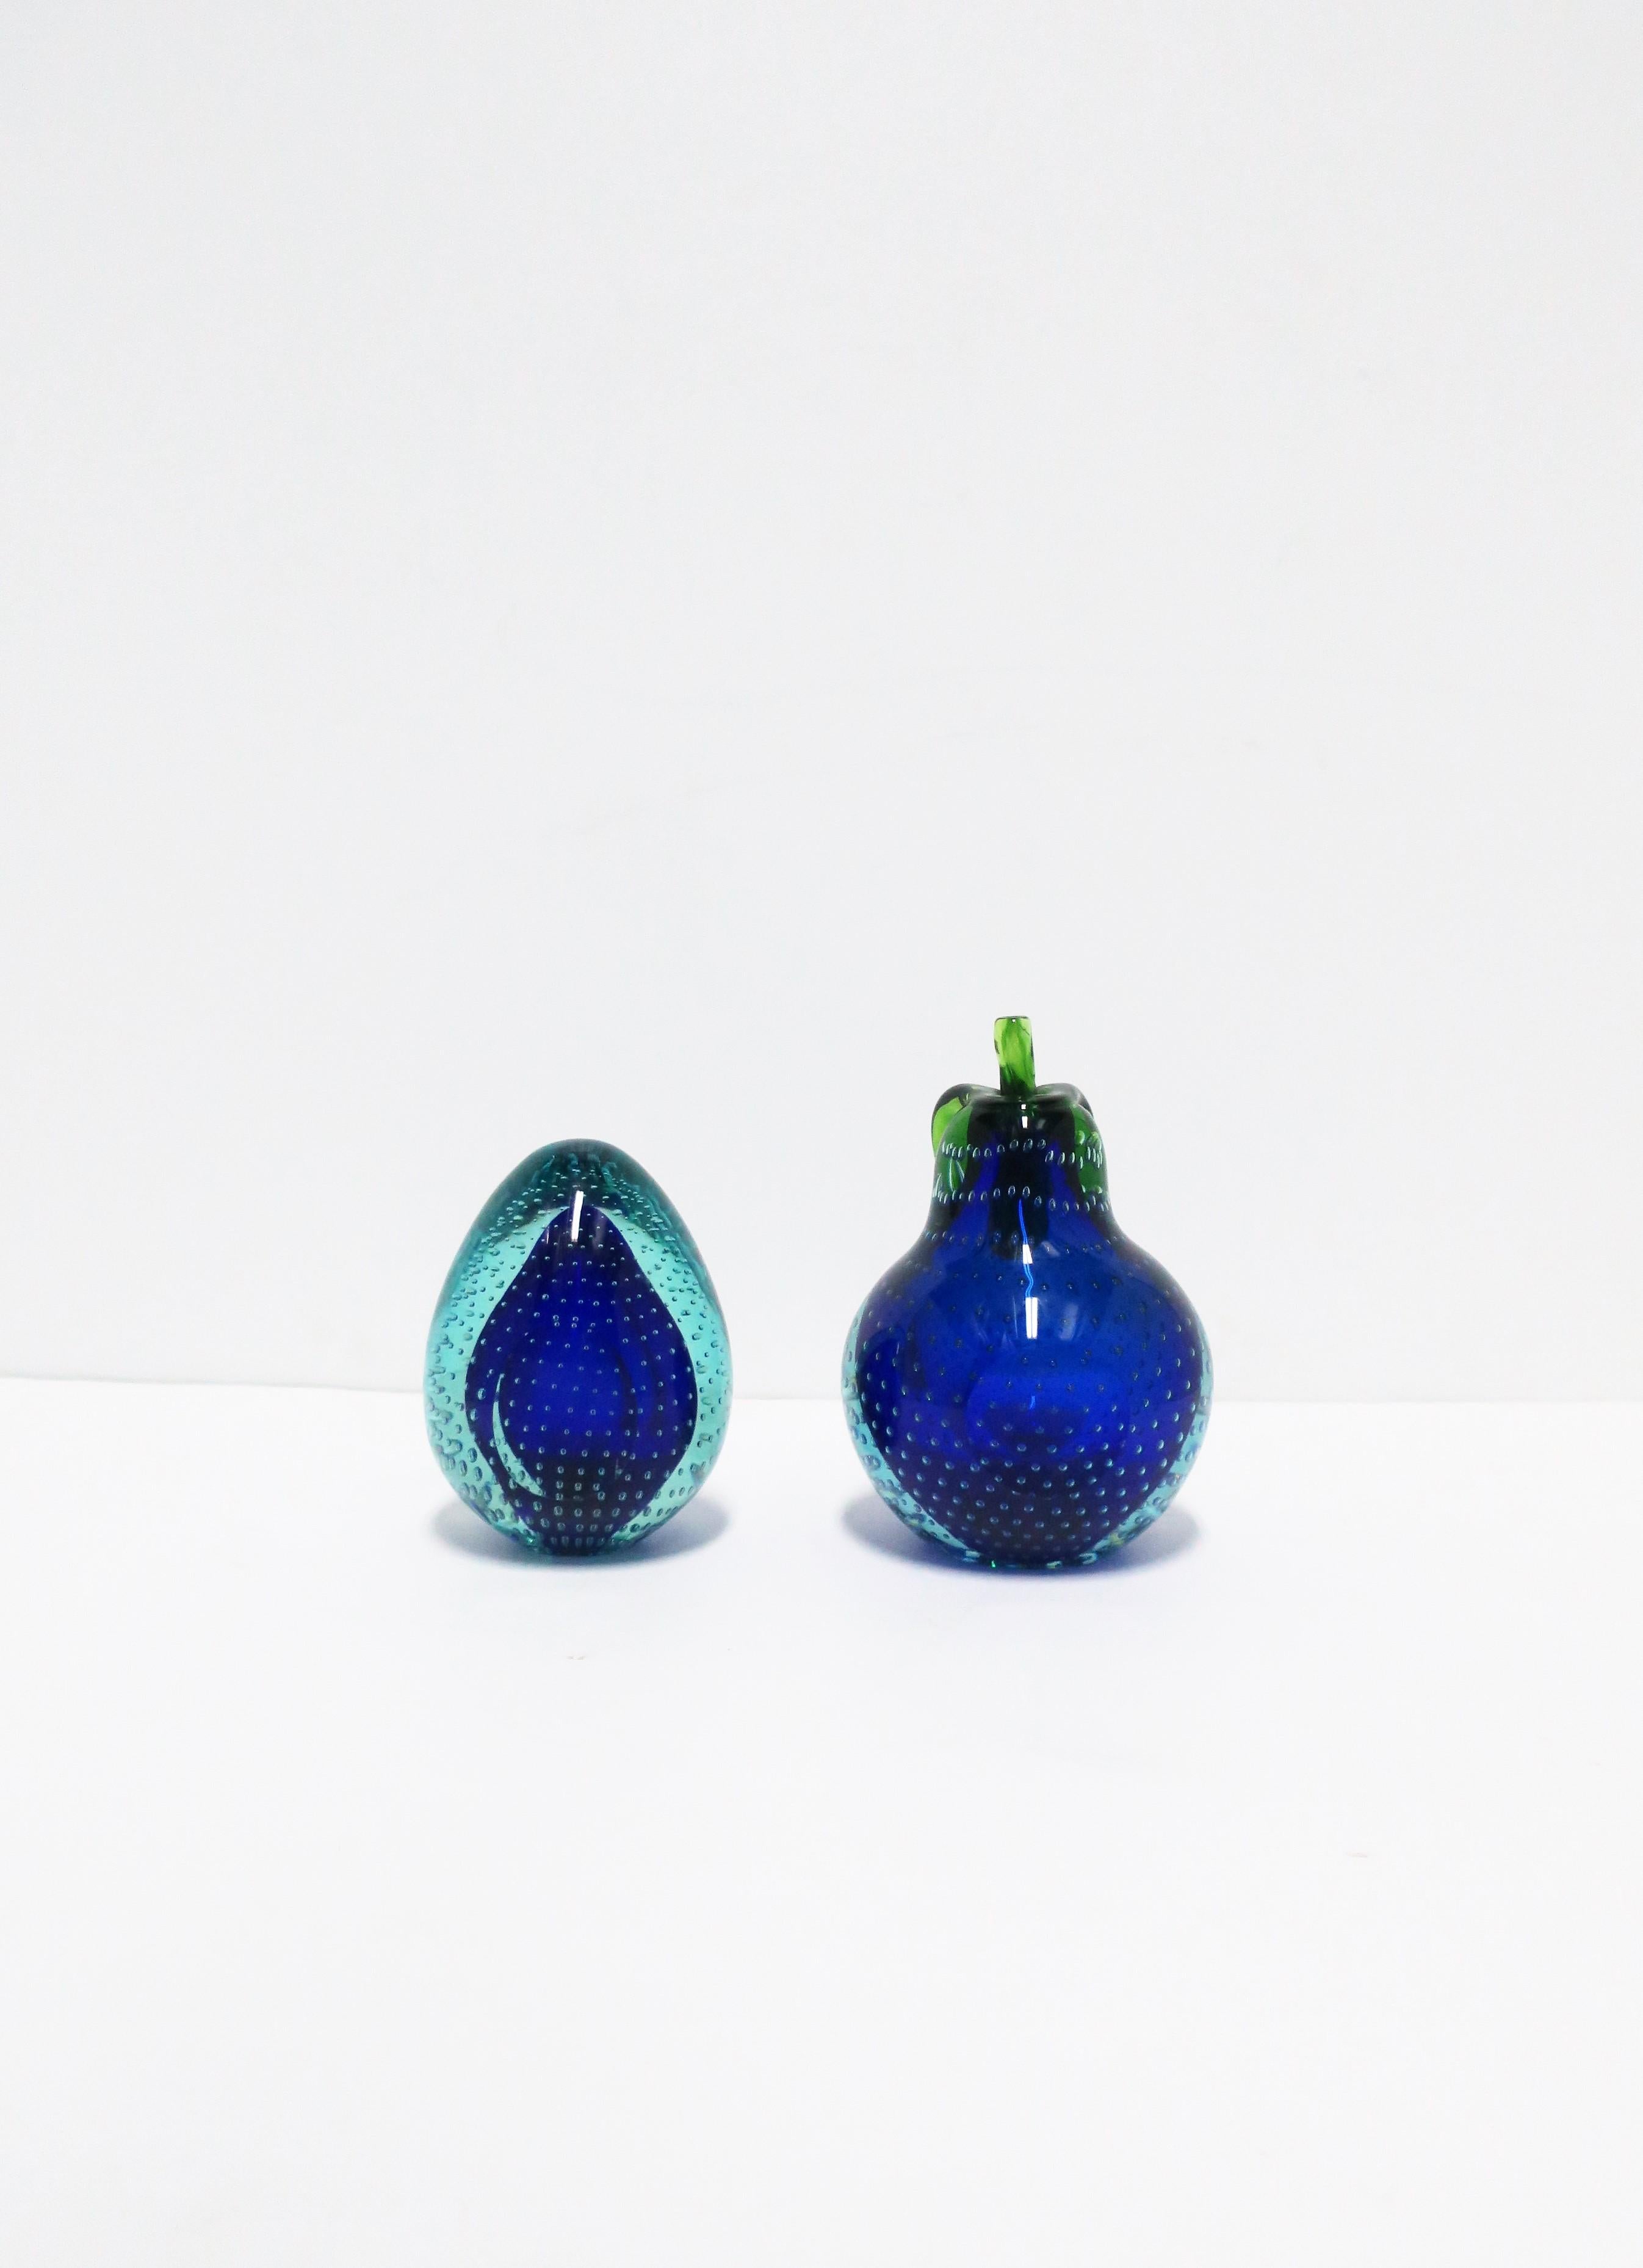 Italian Murano Blue Art Glass Pear Fruit Decorative Objects or Bookends For Sale 2